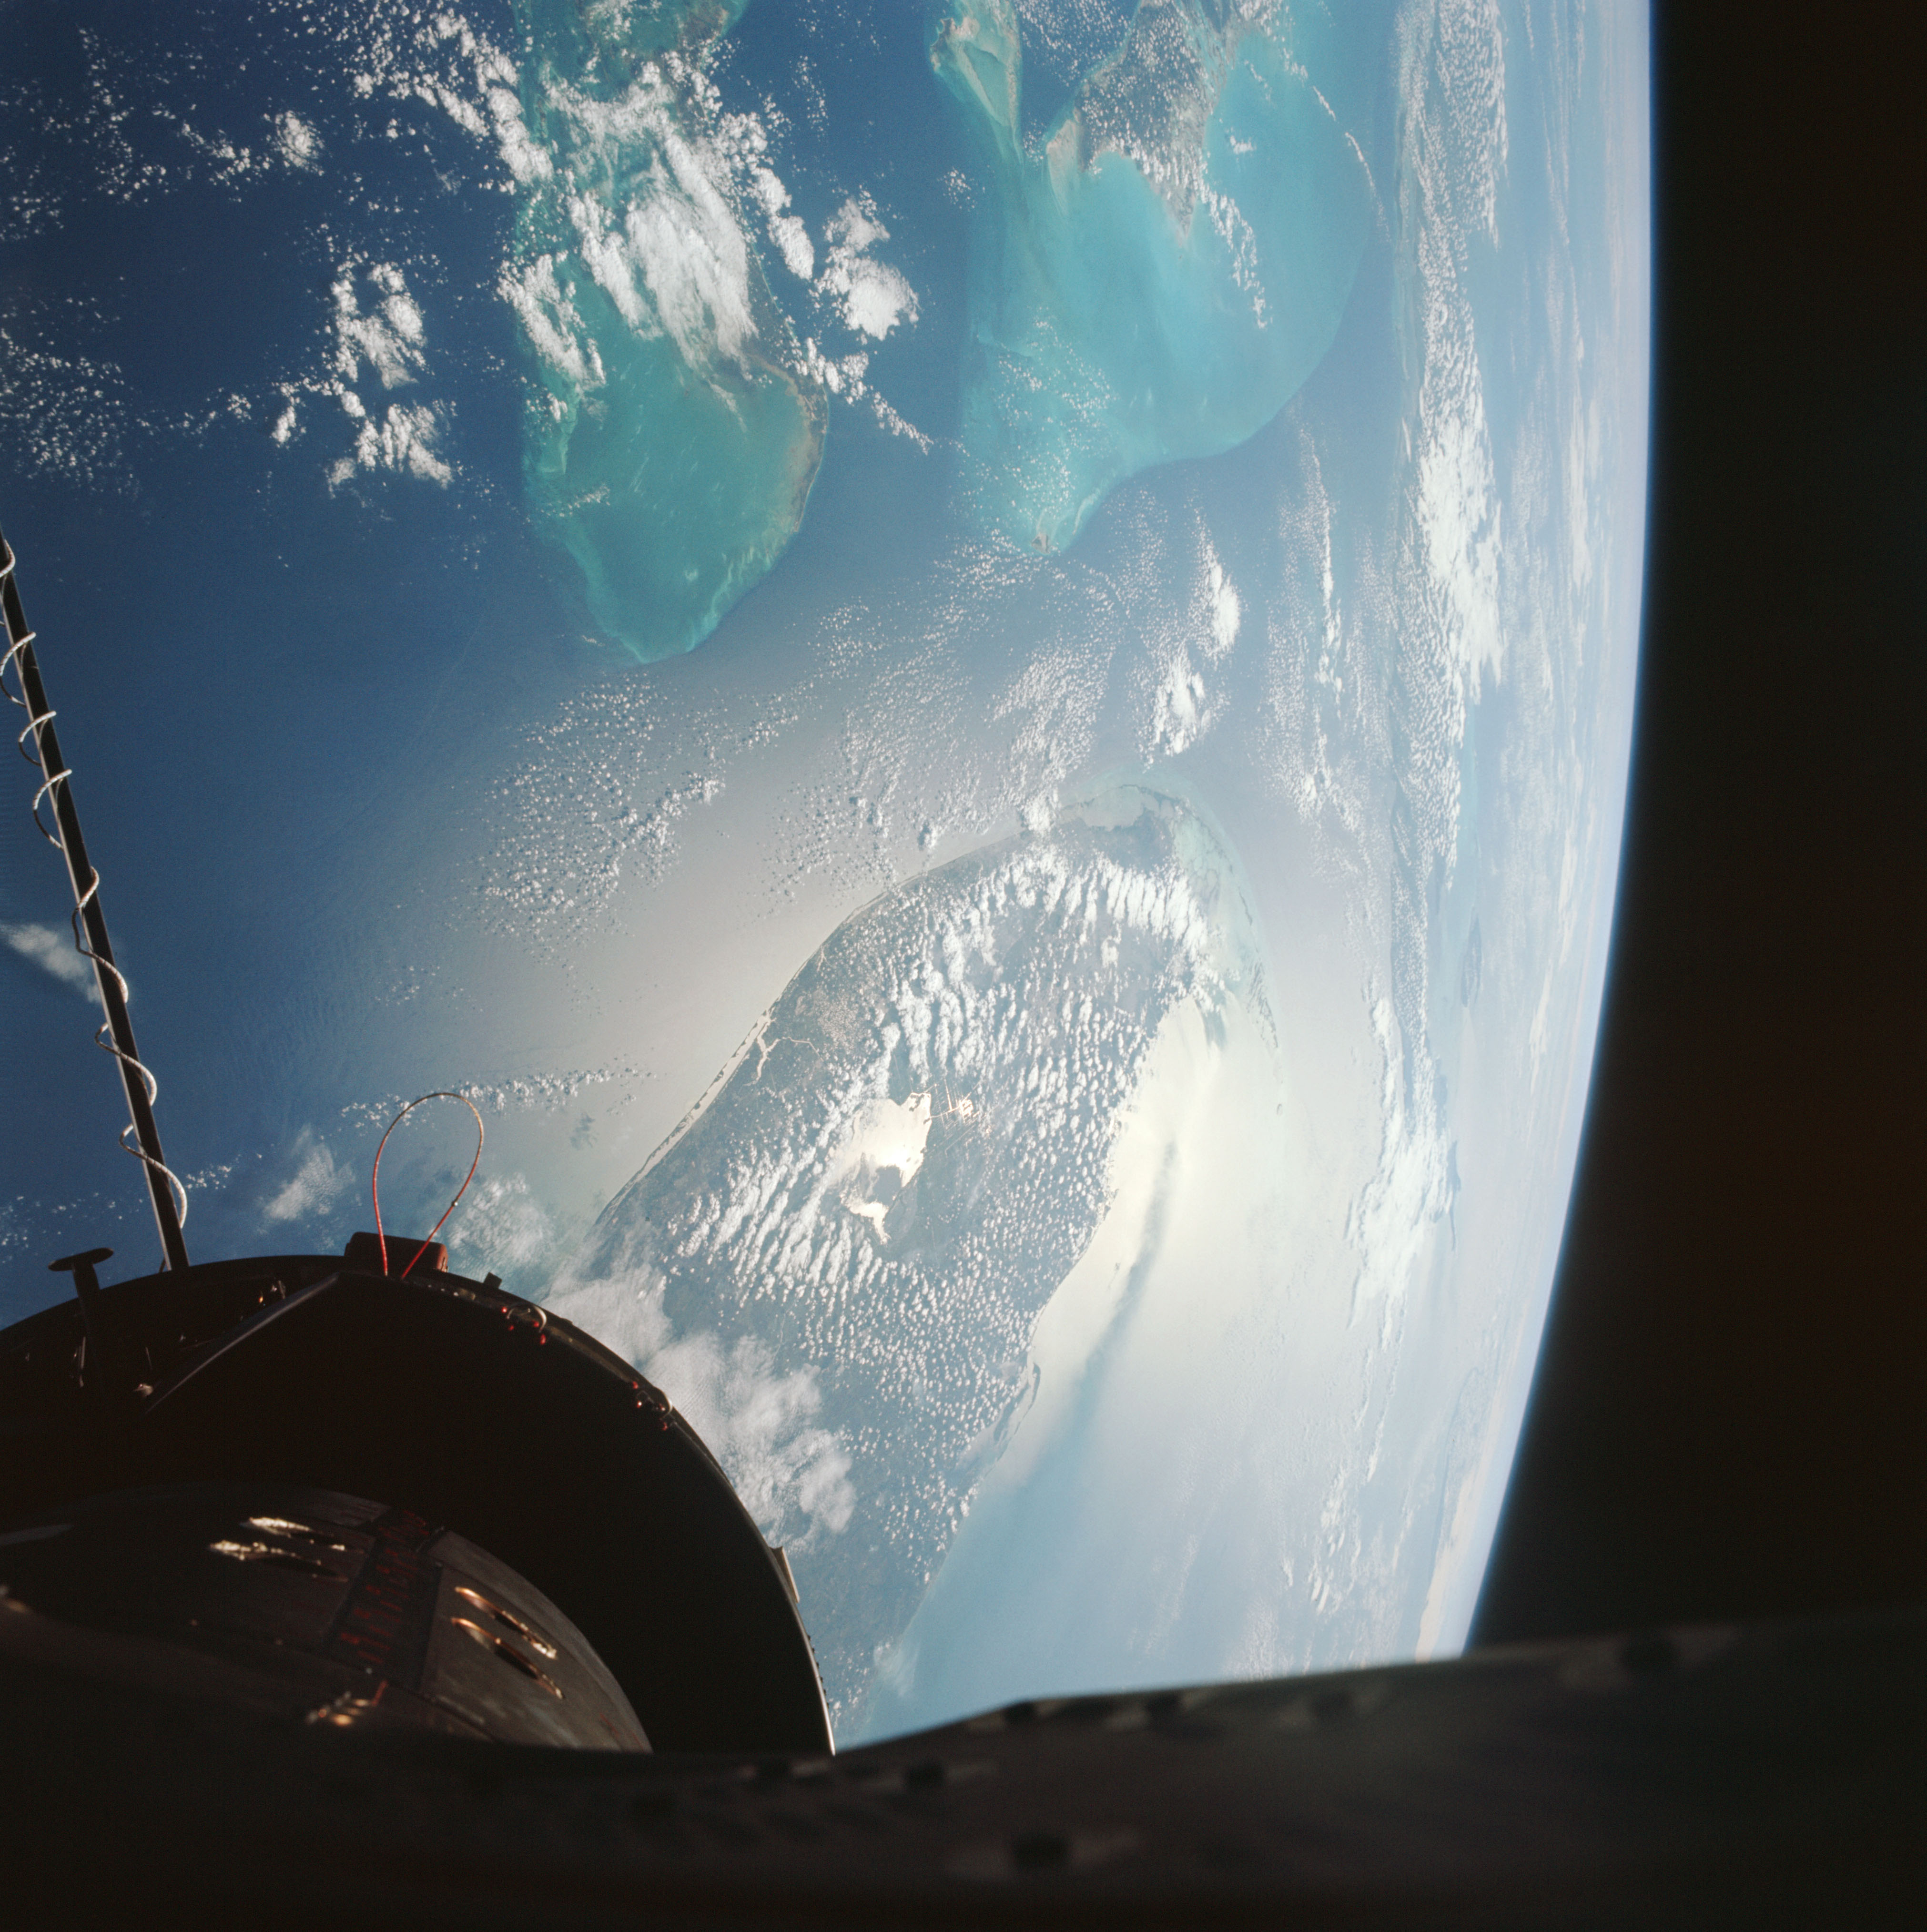 Stunning perspective of Florida, the Bahamas and Cuba, captured by the Gemini XII astronauts. Photo Credit: NASA